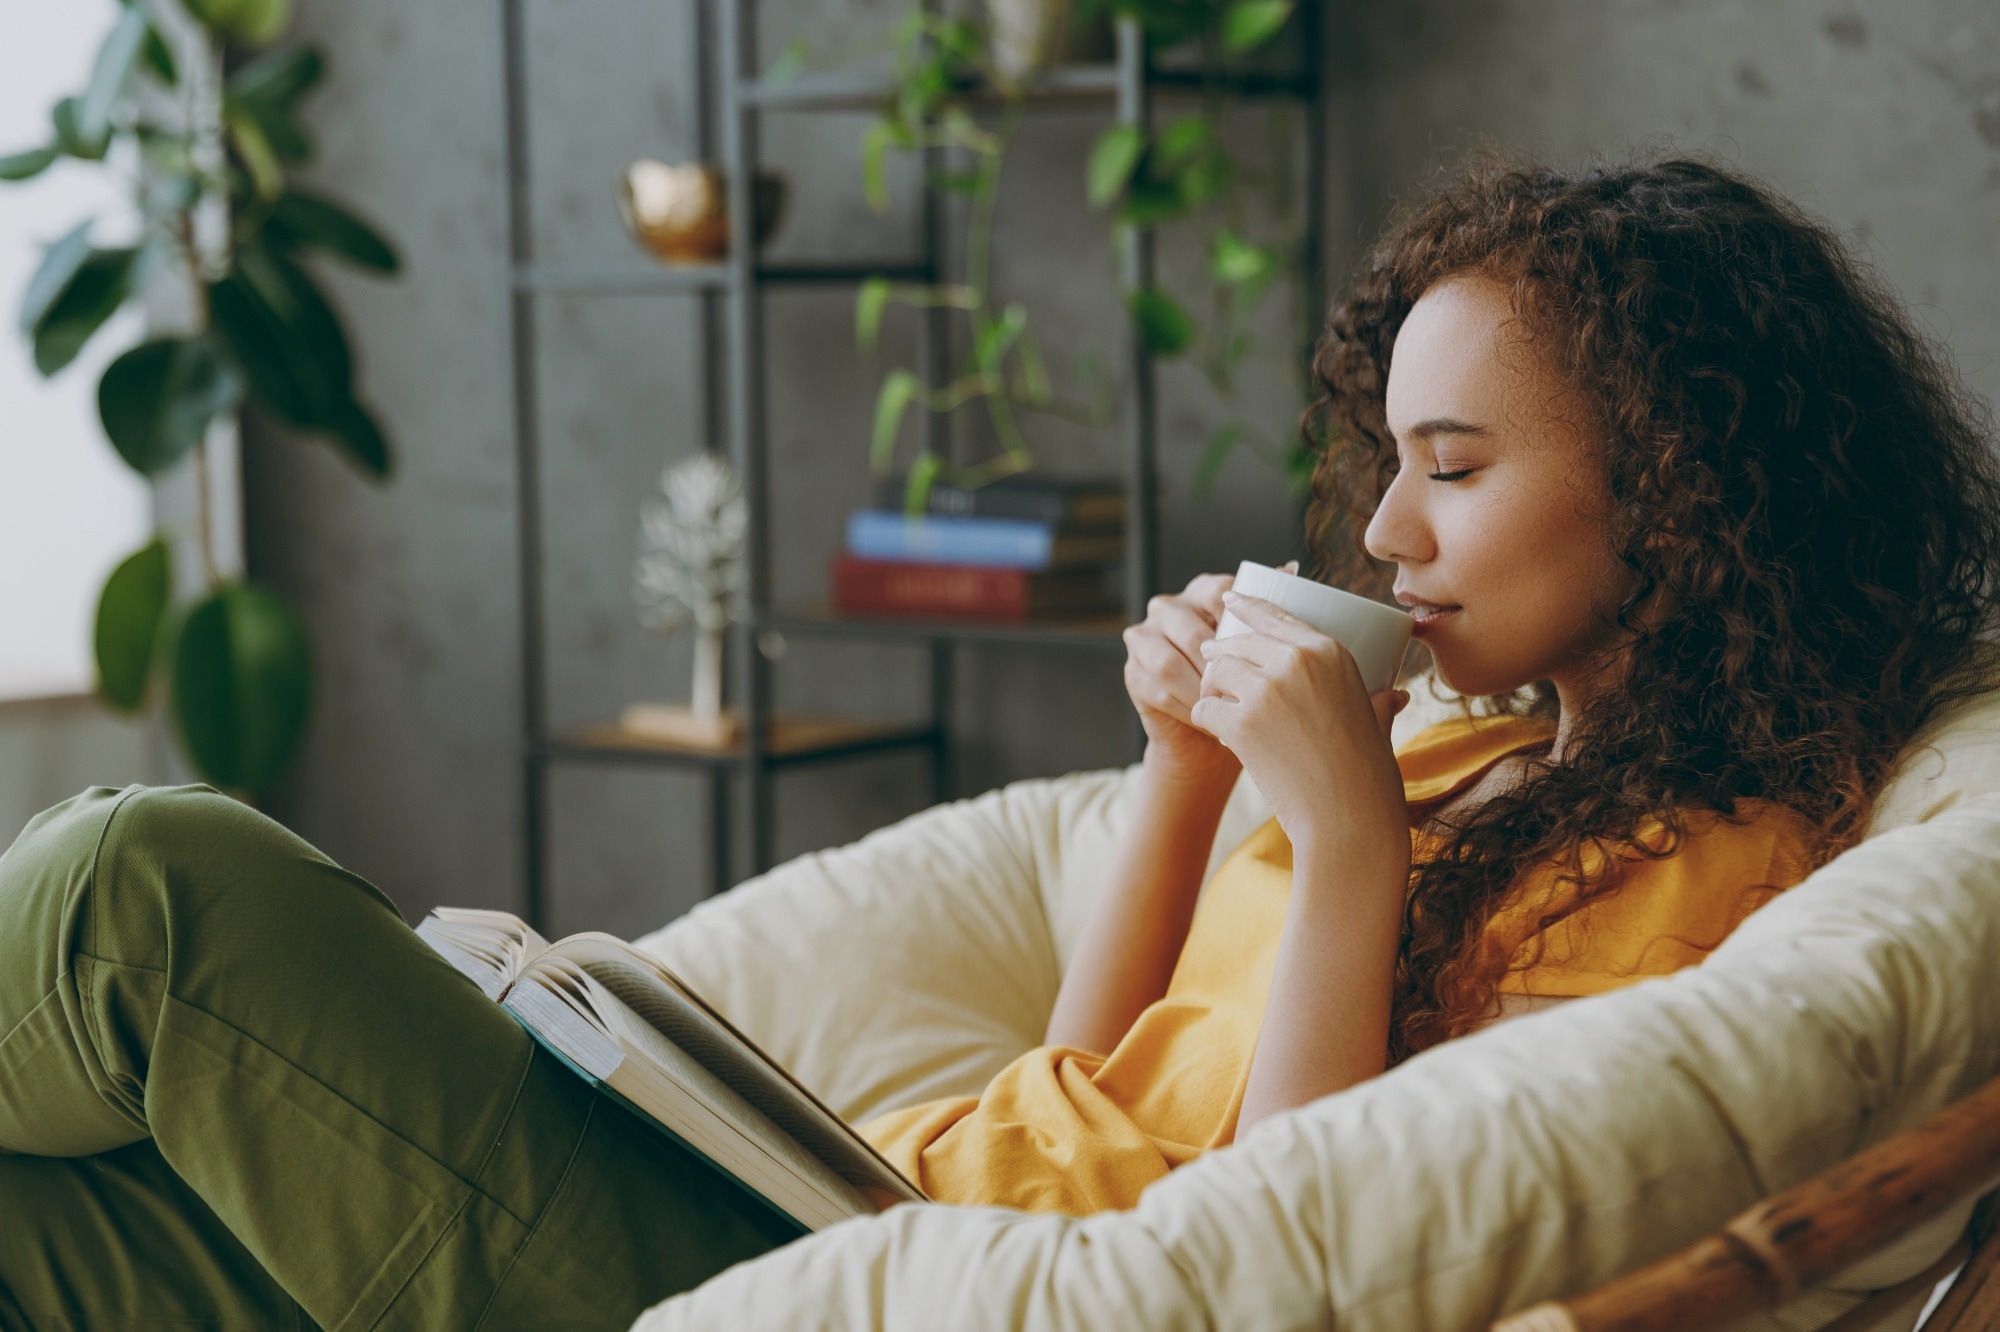 Study: Association of daily sitting time and coffee consumption with the risk of all-cause and cardiovascular disease mortality among US adults. Image Credit: ViDI Studio/Shutterstock.com